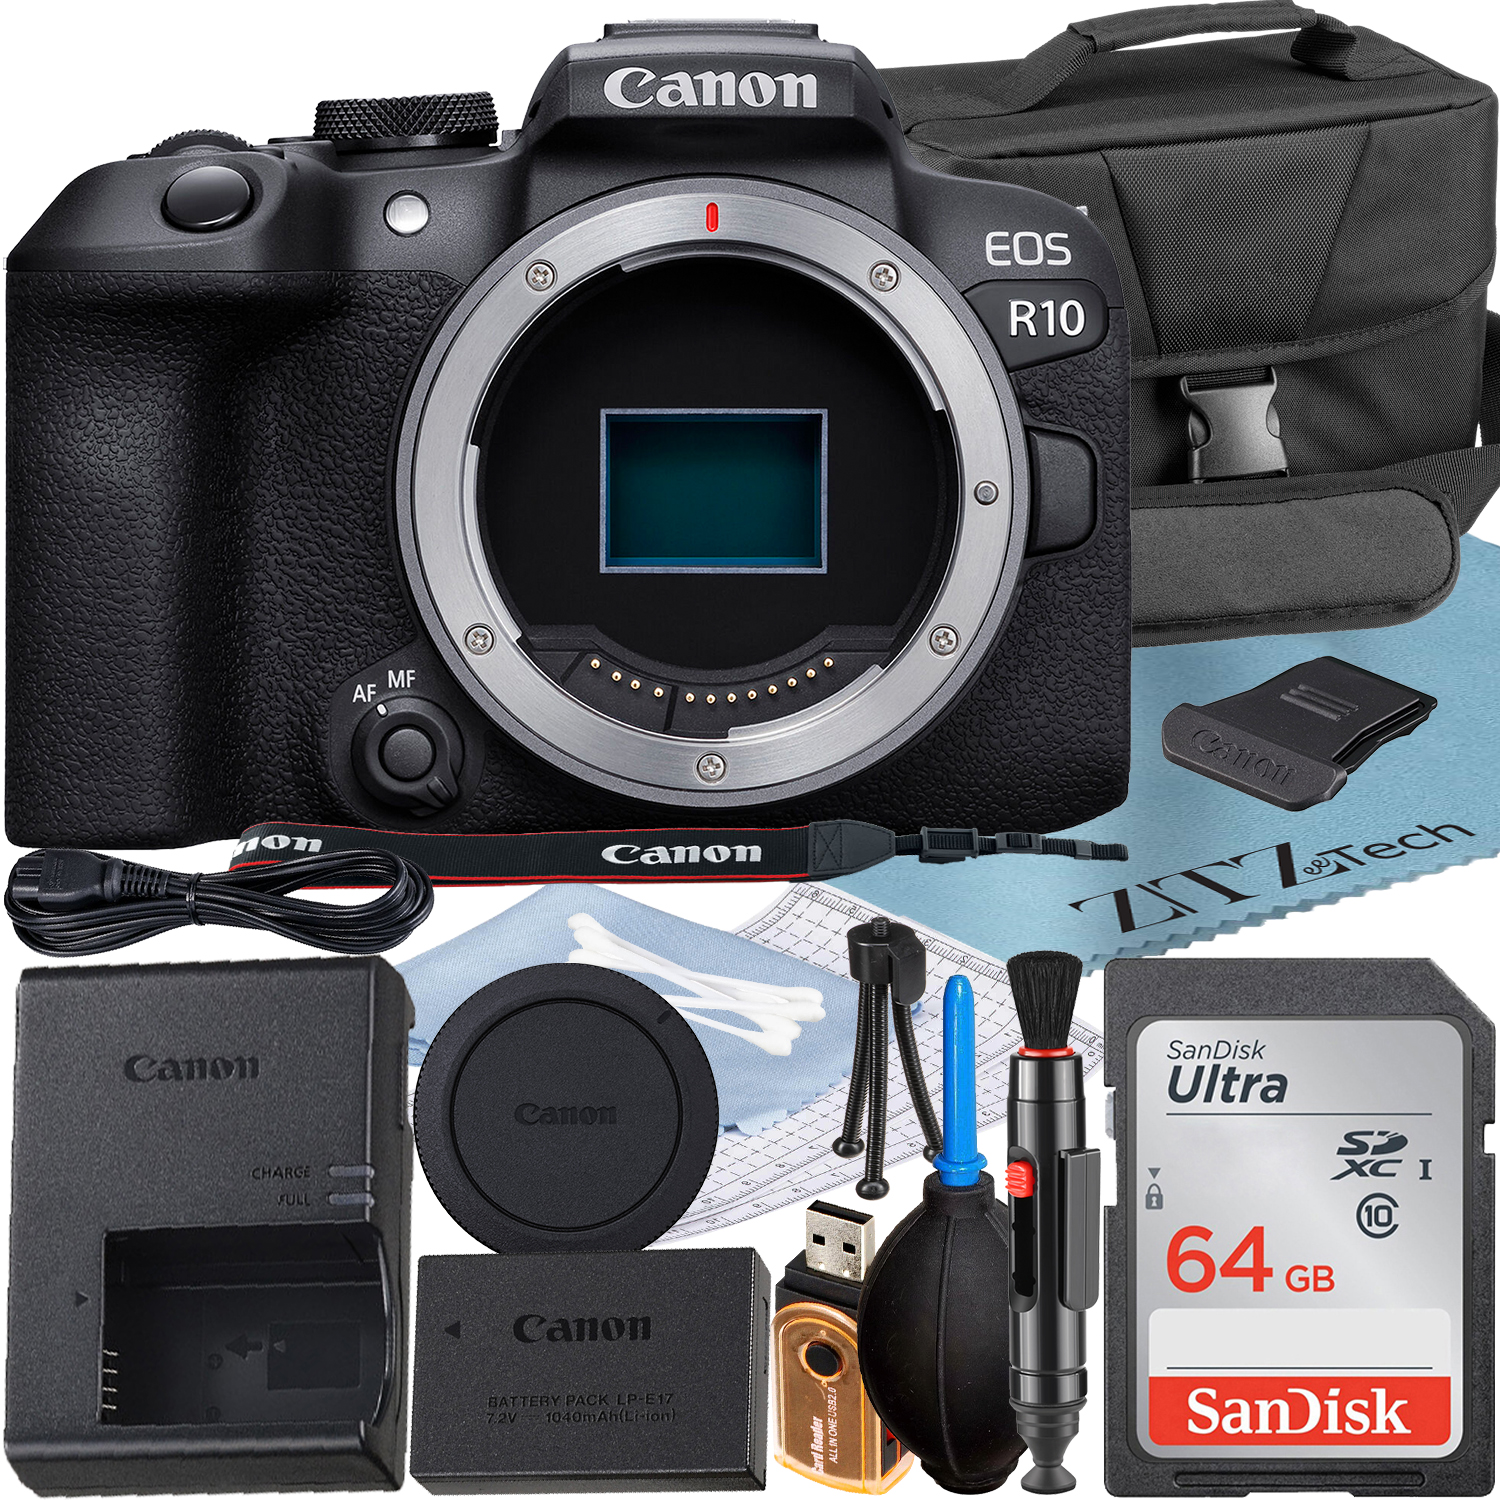 Canon EOS R10 Mirrorless Camera (Body) with 4K Video + SanDisk 64GB Memory Card + Case + ZeeTech Accessory Bundle